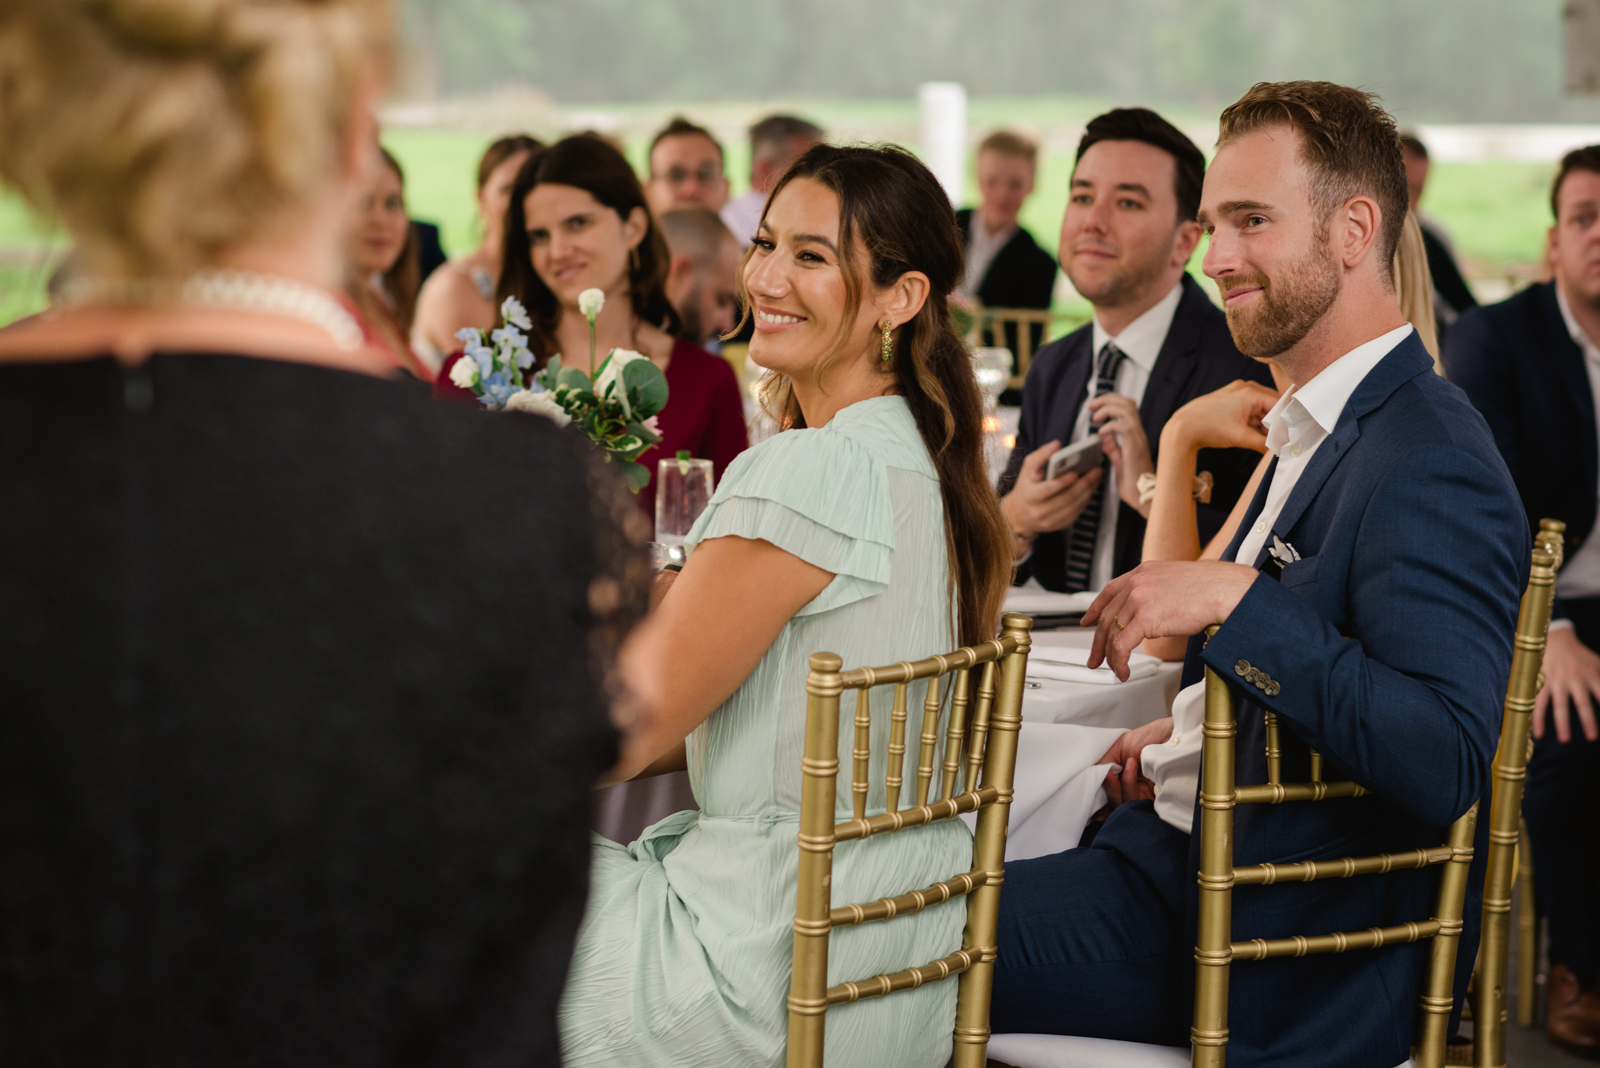 guests smiling during speeches at wedding